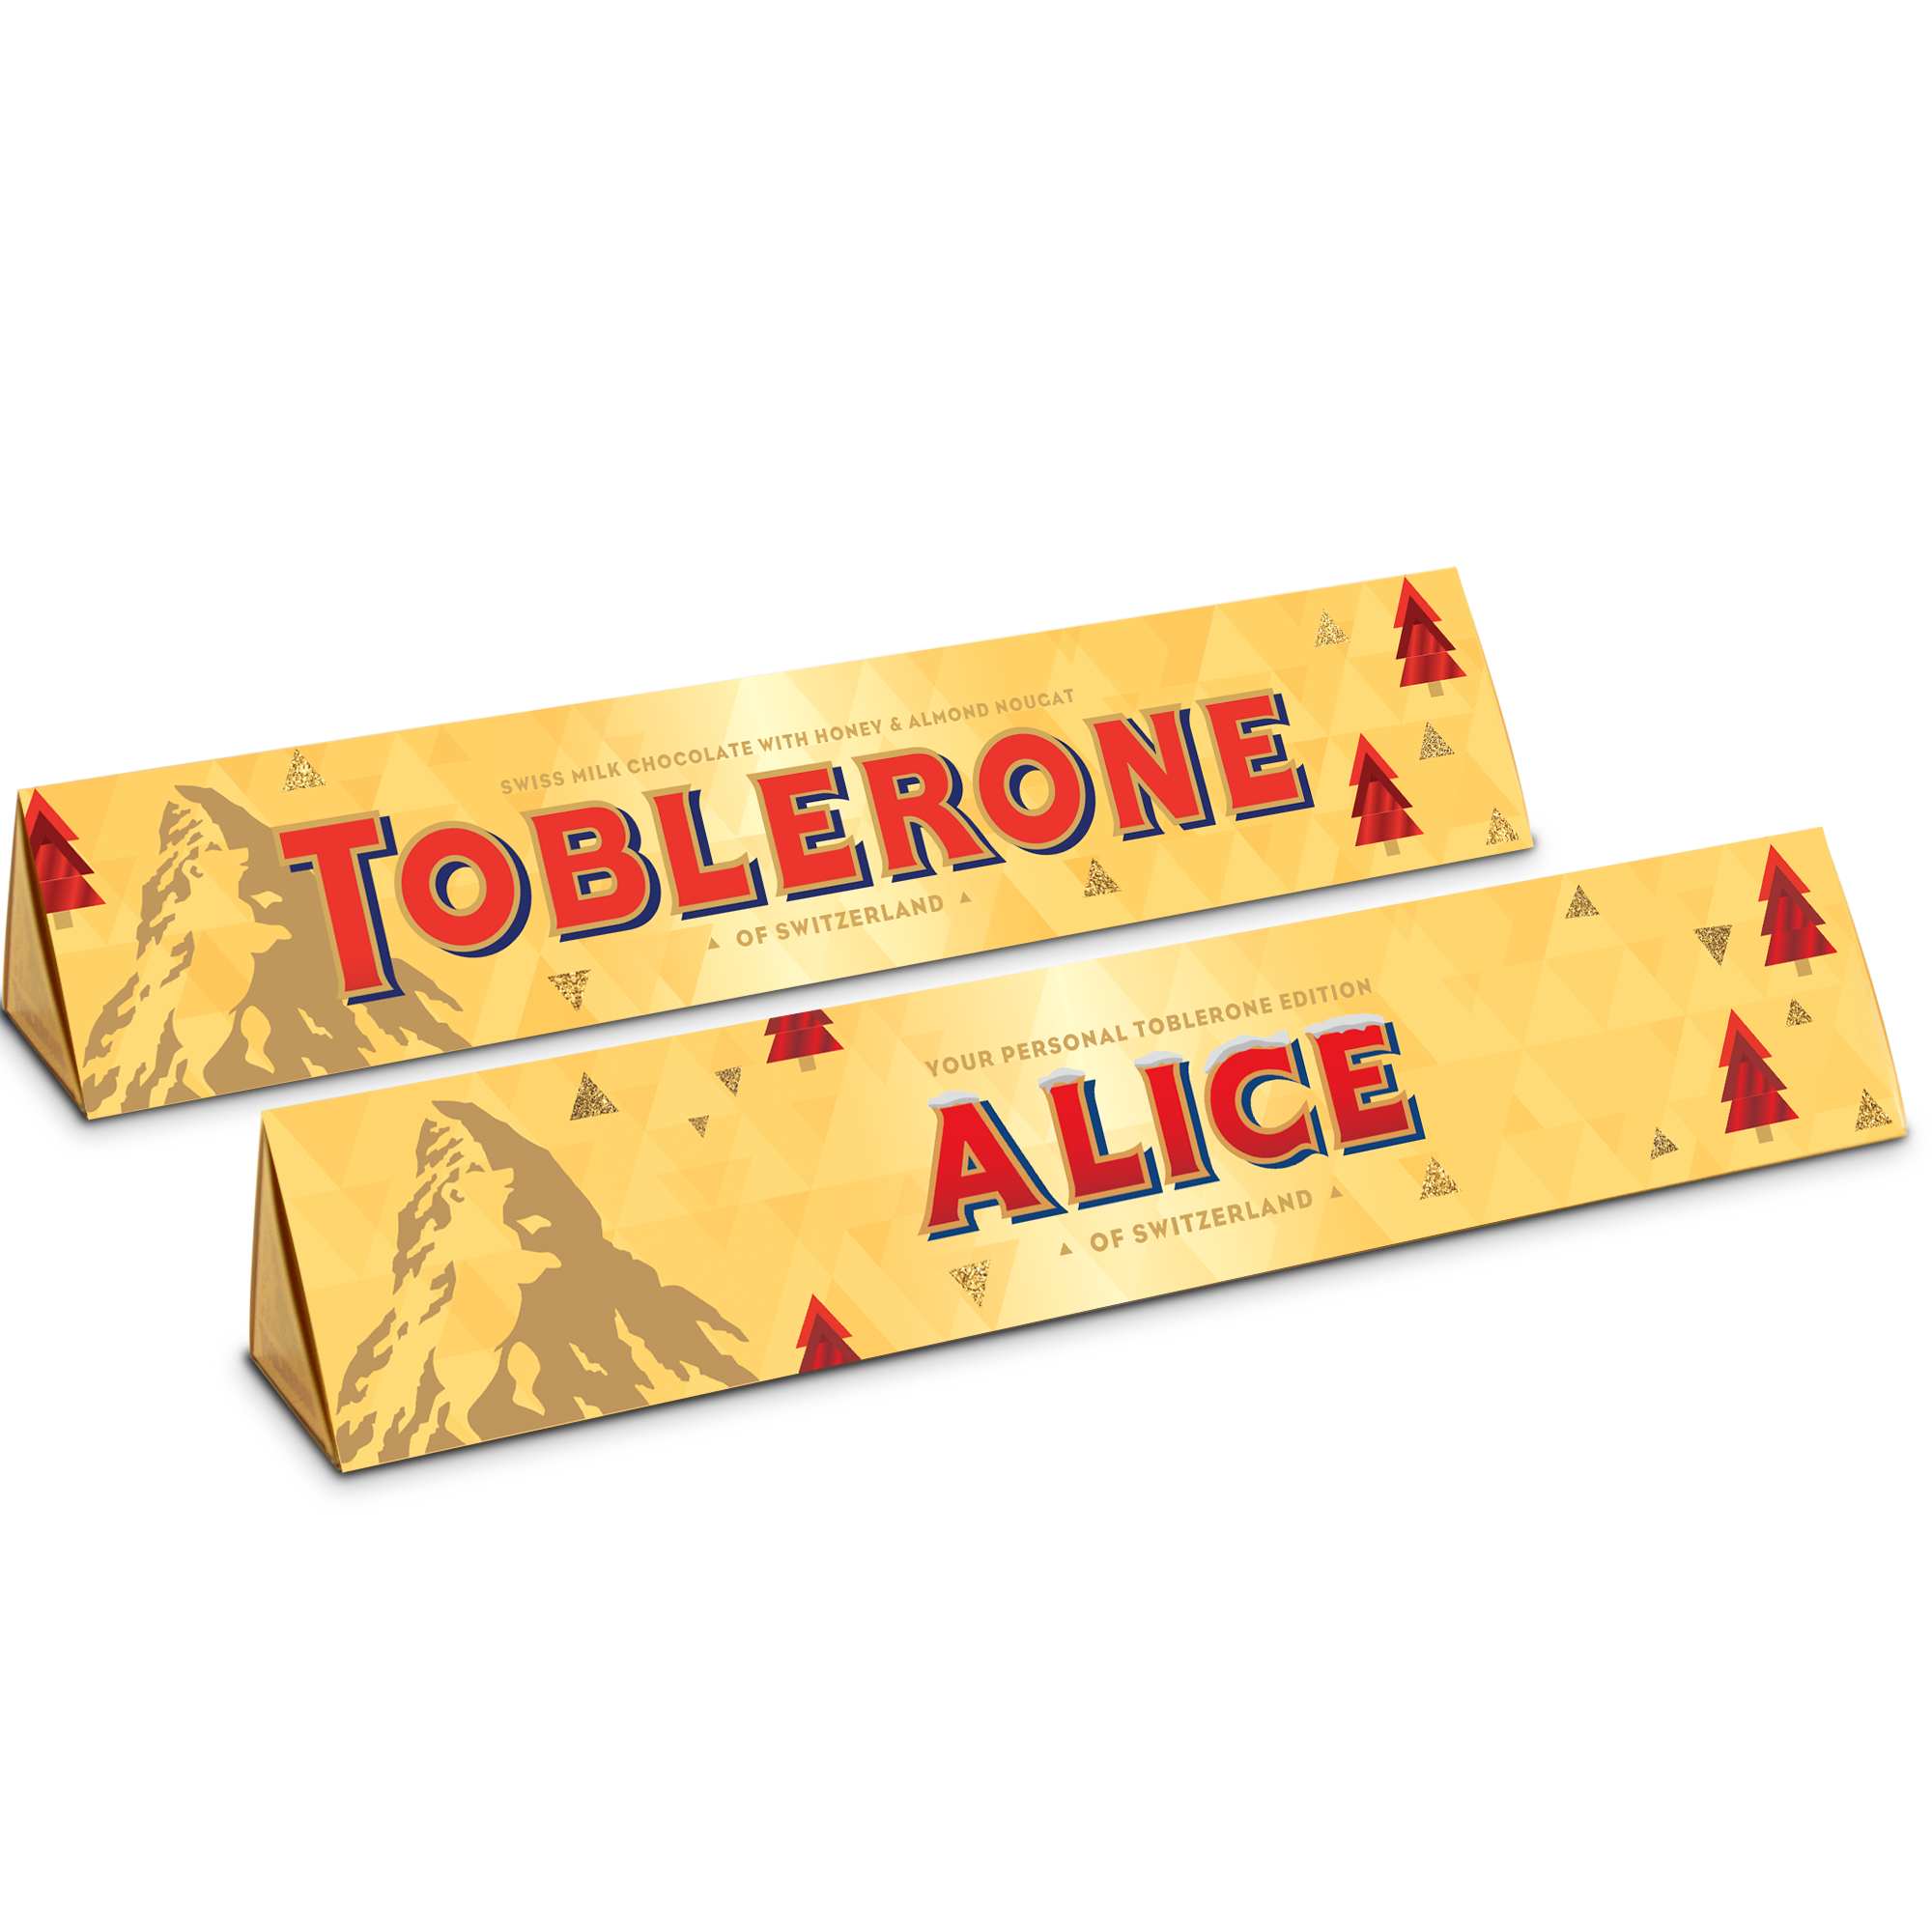 Personalise This 360g Toblerone With Christmas Personalised Sleeve And Tobleronefr